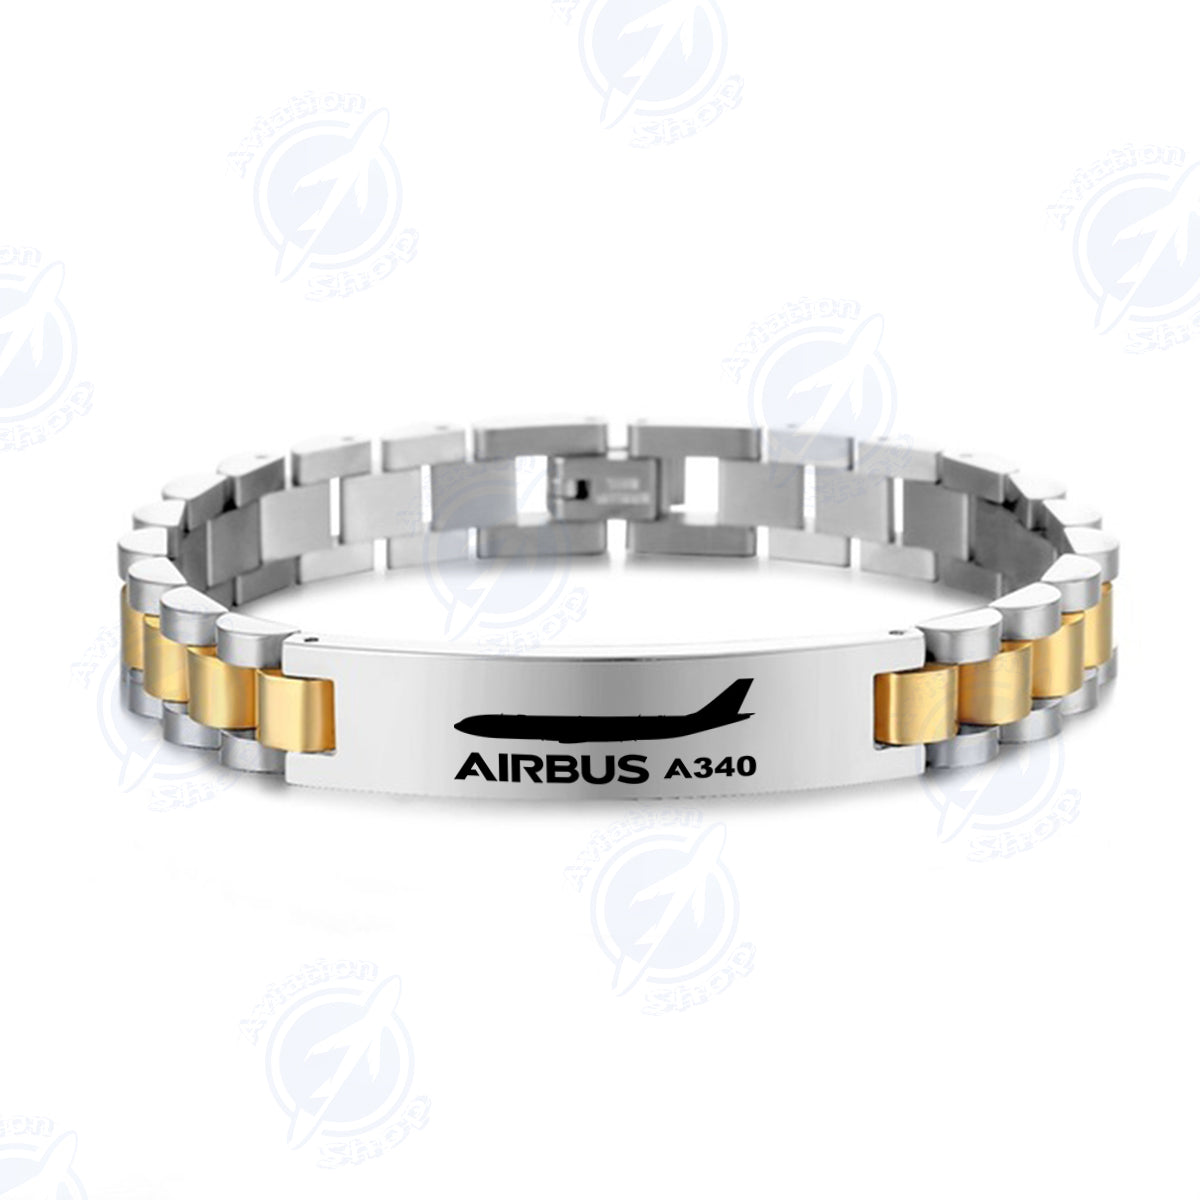 The Airbus A340 Designed Stainless Steel Chain Bracelets